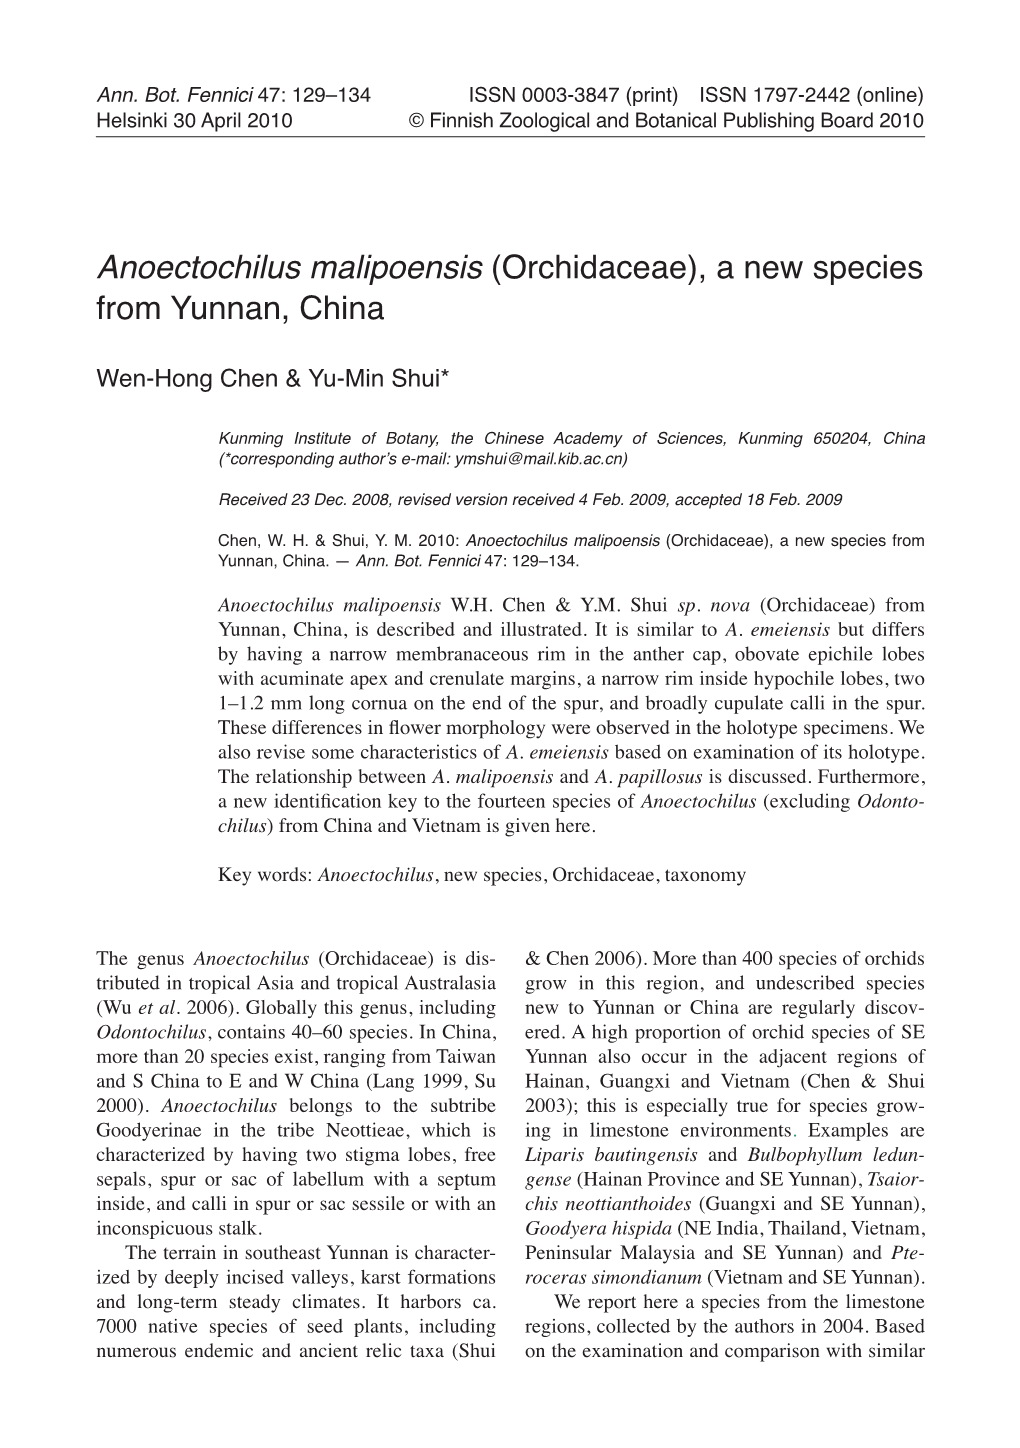 Anoectochilus Malipoensis (Orchidaceae), a New Species from Yunnan, China